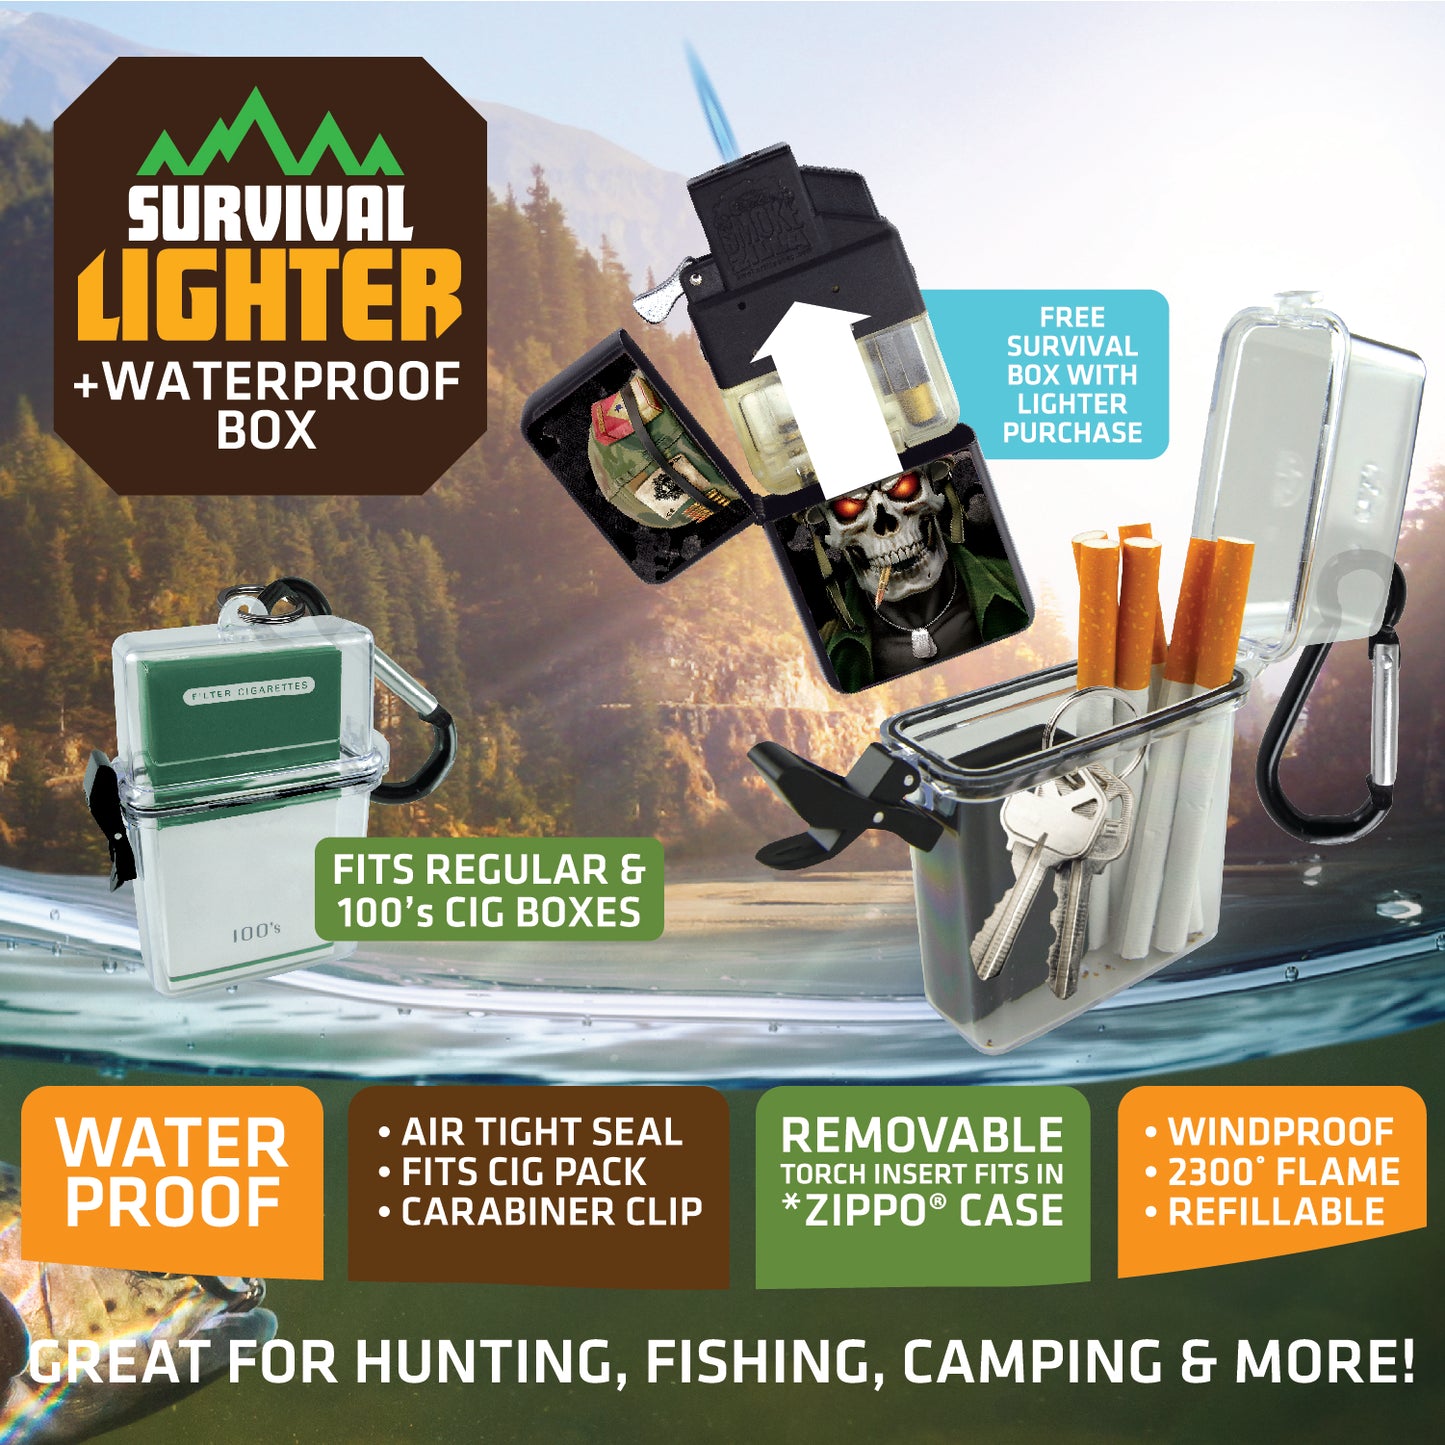 ITEM NUMBER 023110L LIGHTER IN SURVIVAL BOX - STORE SURPLUS NO DISPLAY 8 PIECES PER PACK